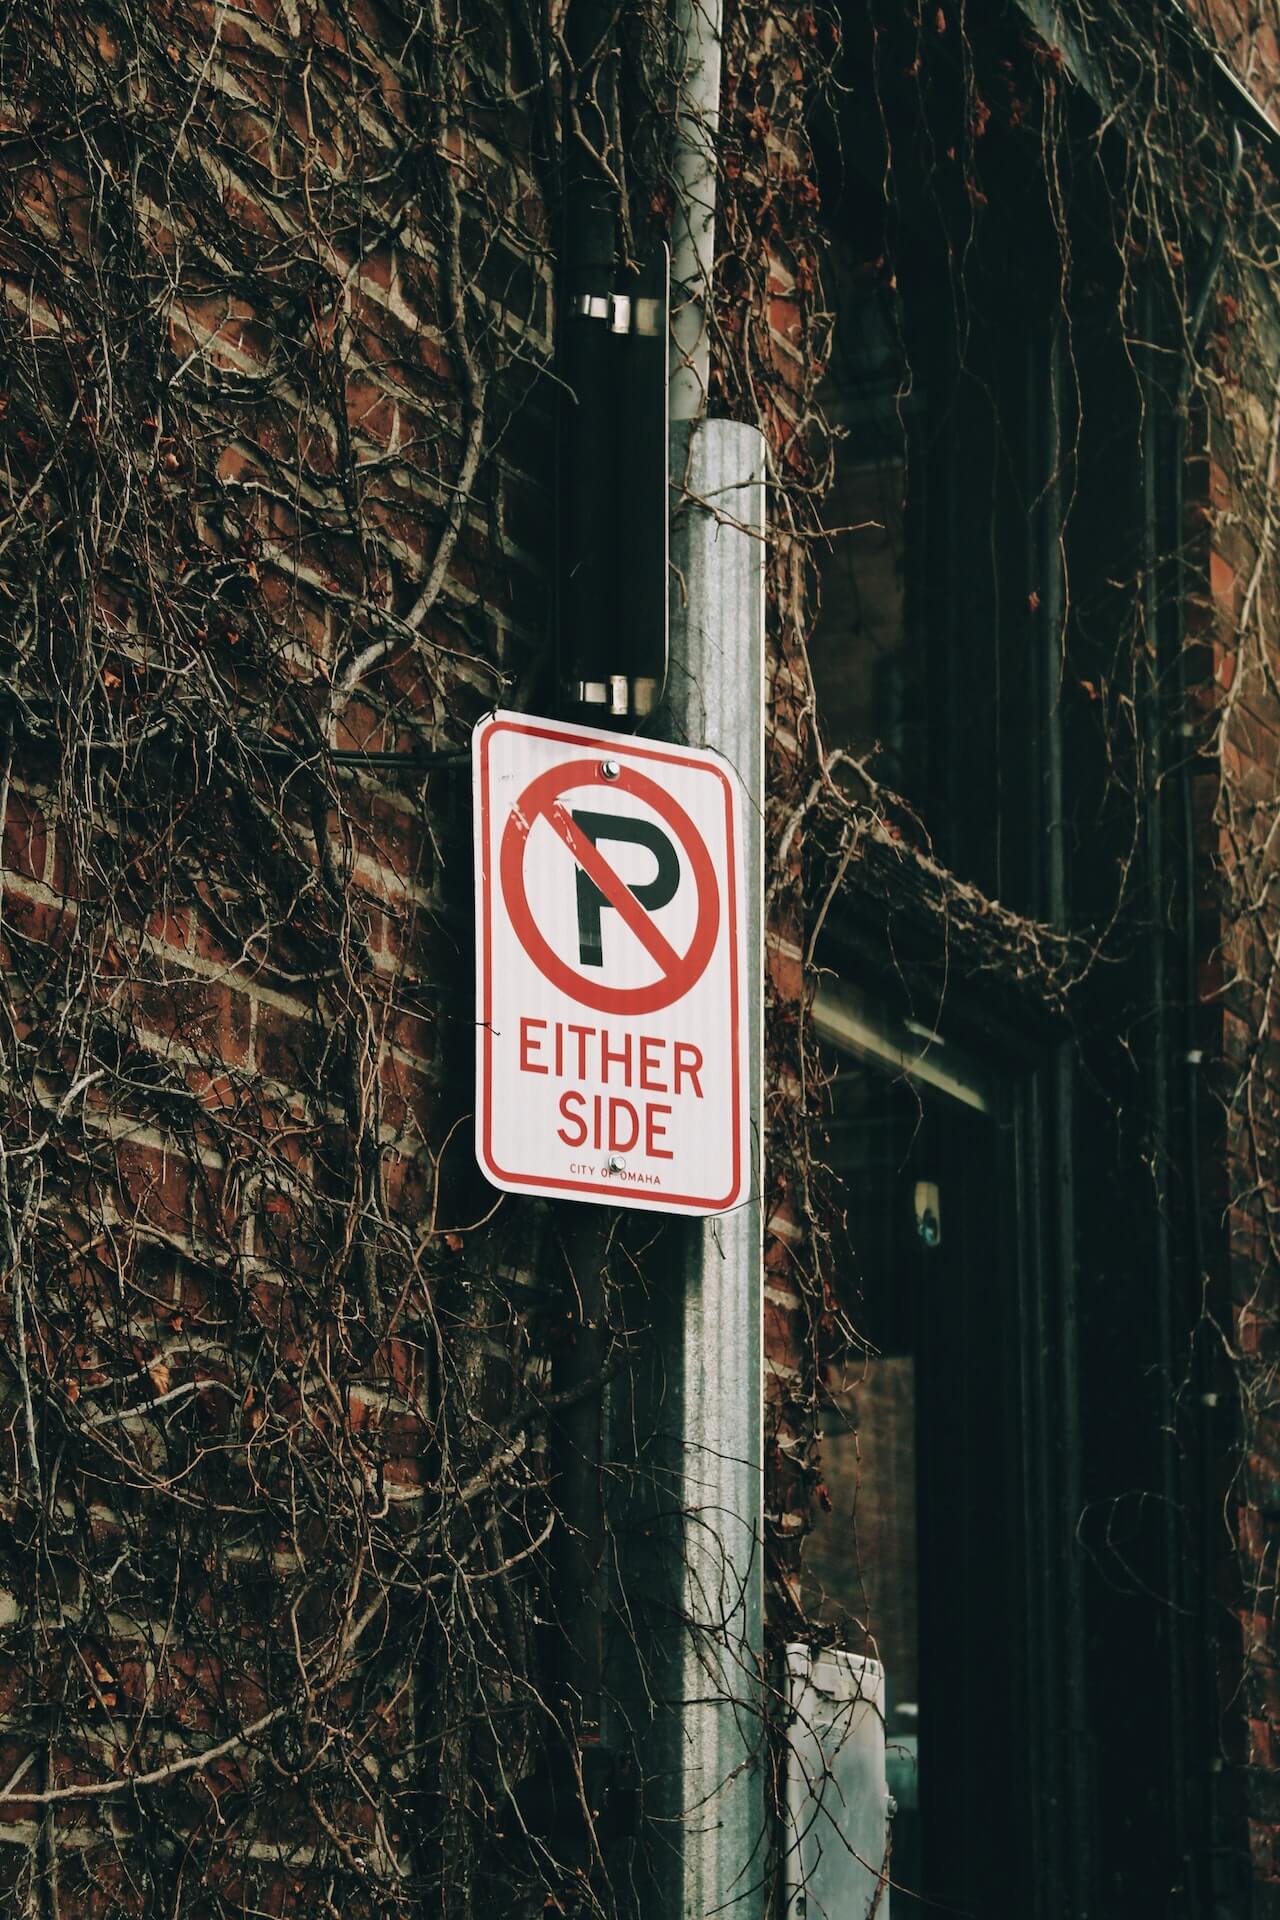 Parking on Pavement Law UK: Understand The Rules 2023